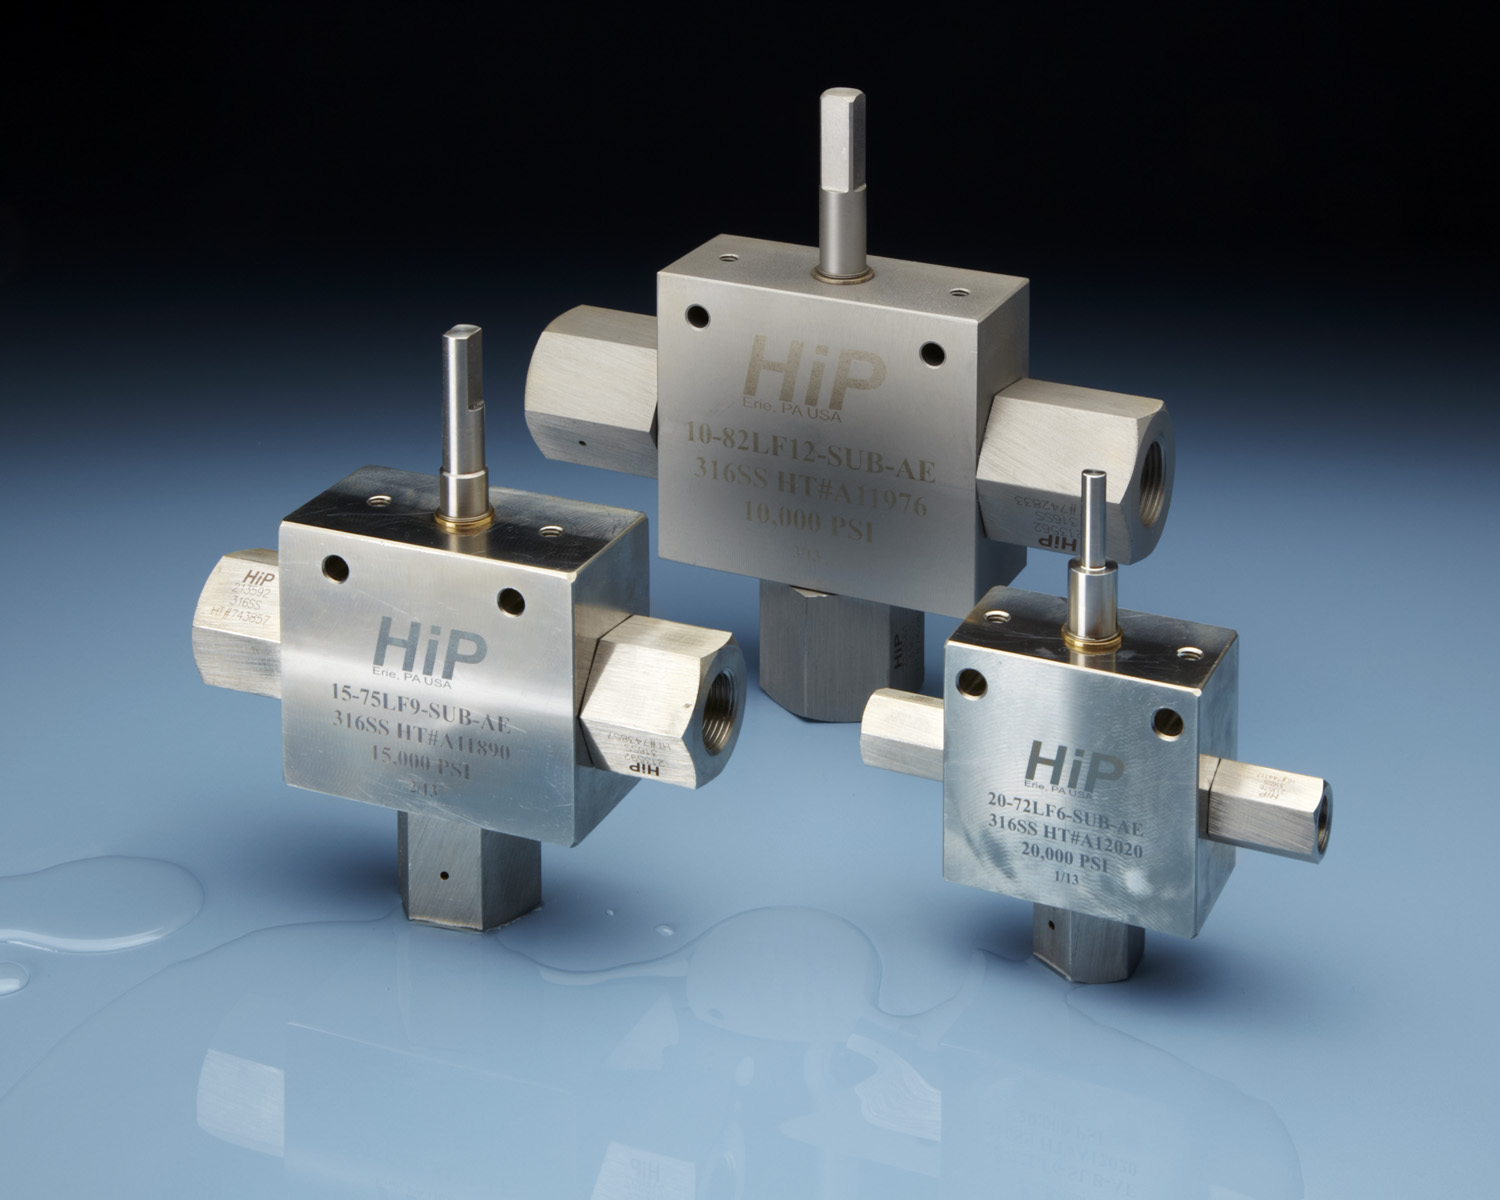 New SubSea Ball Valves from HiP